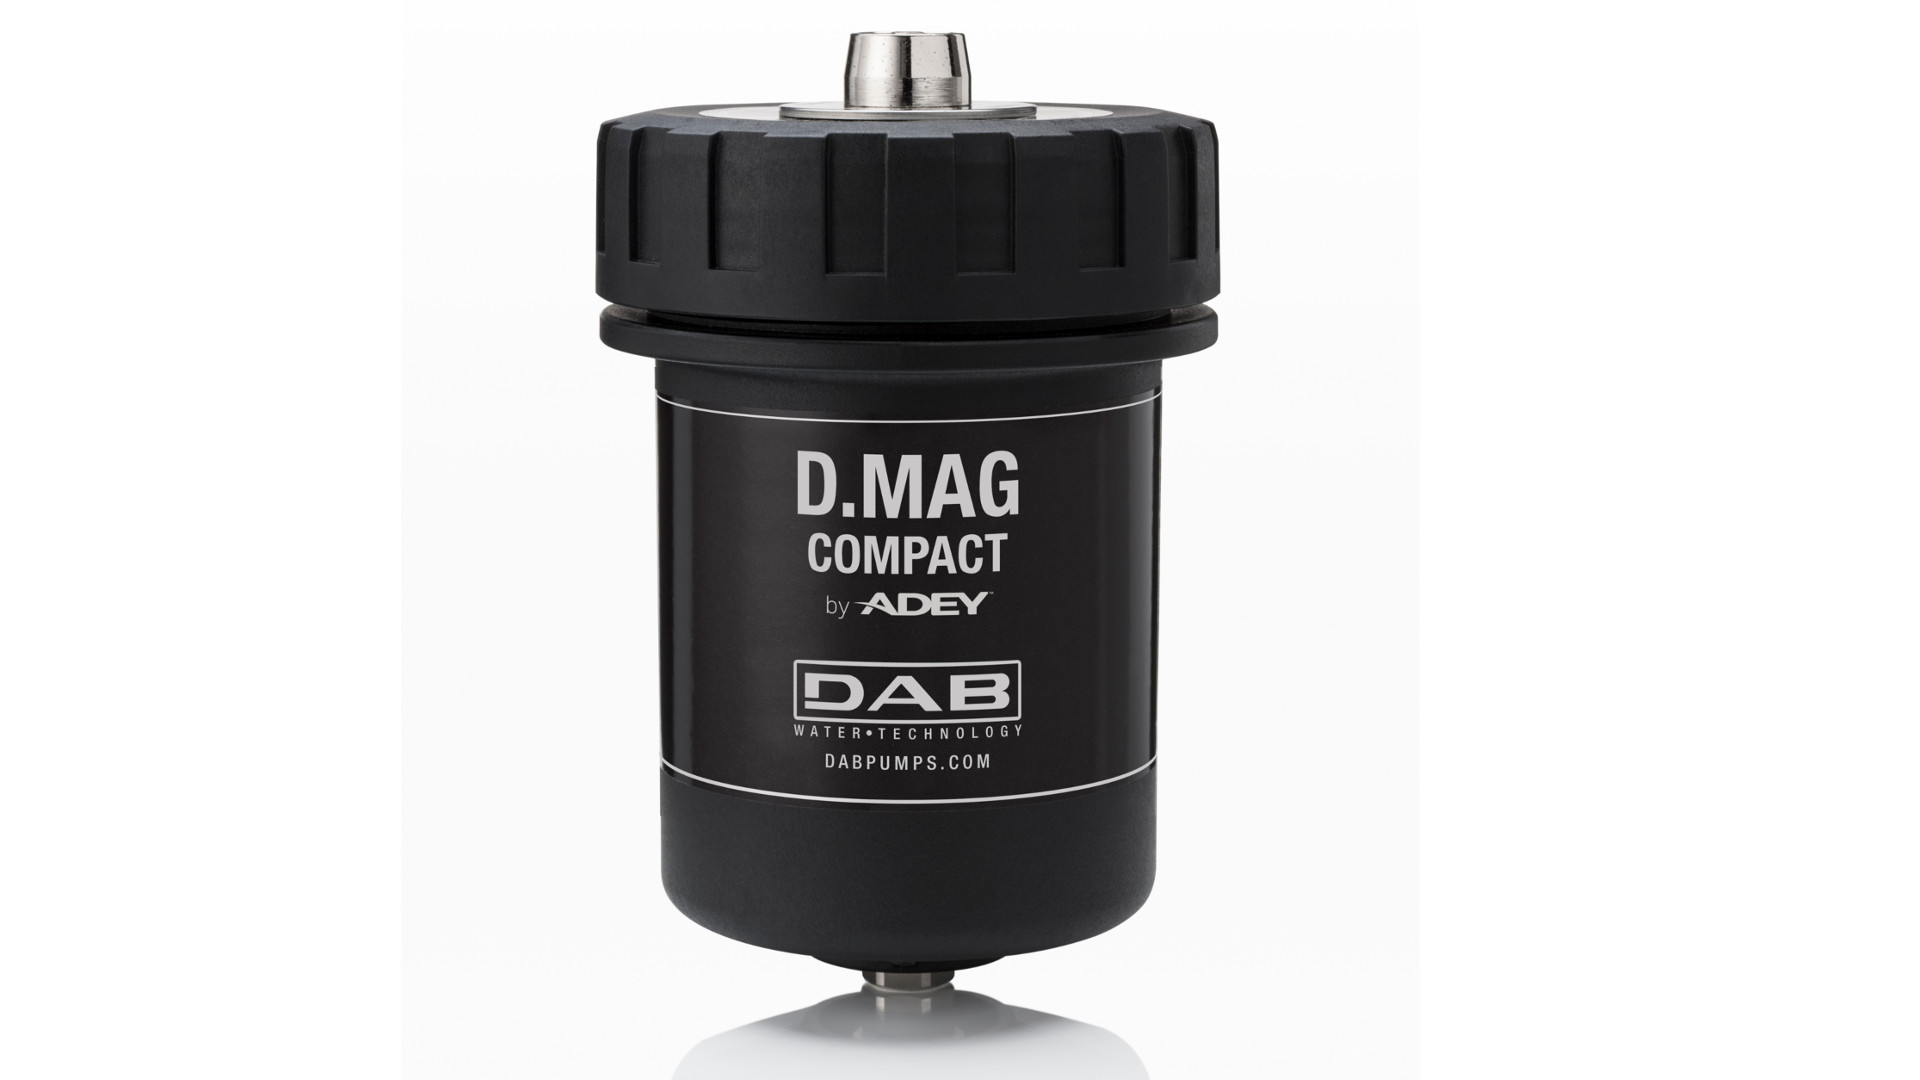 D.Mag Compact